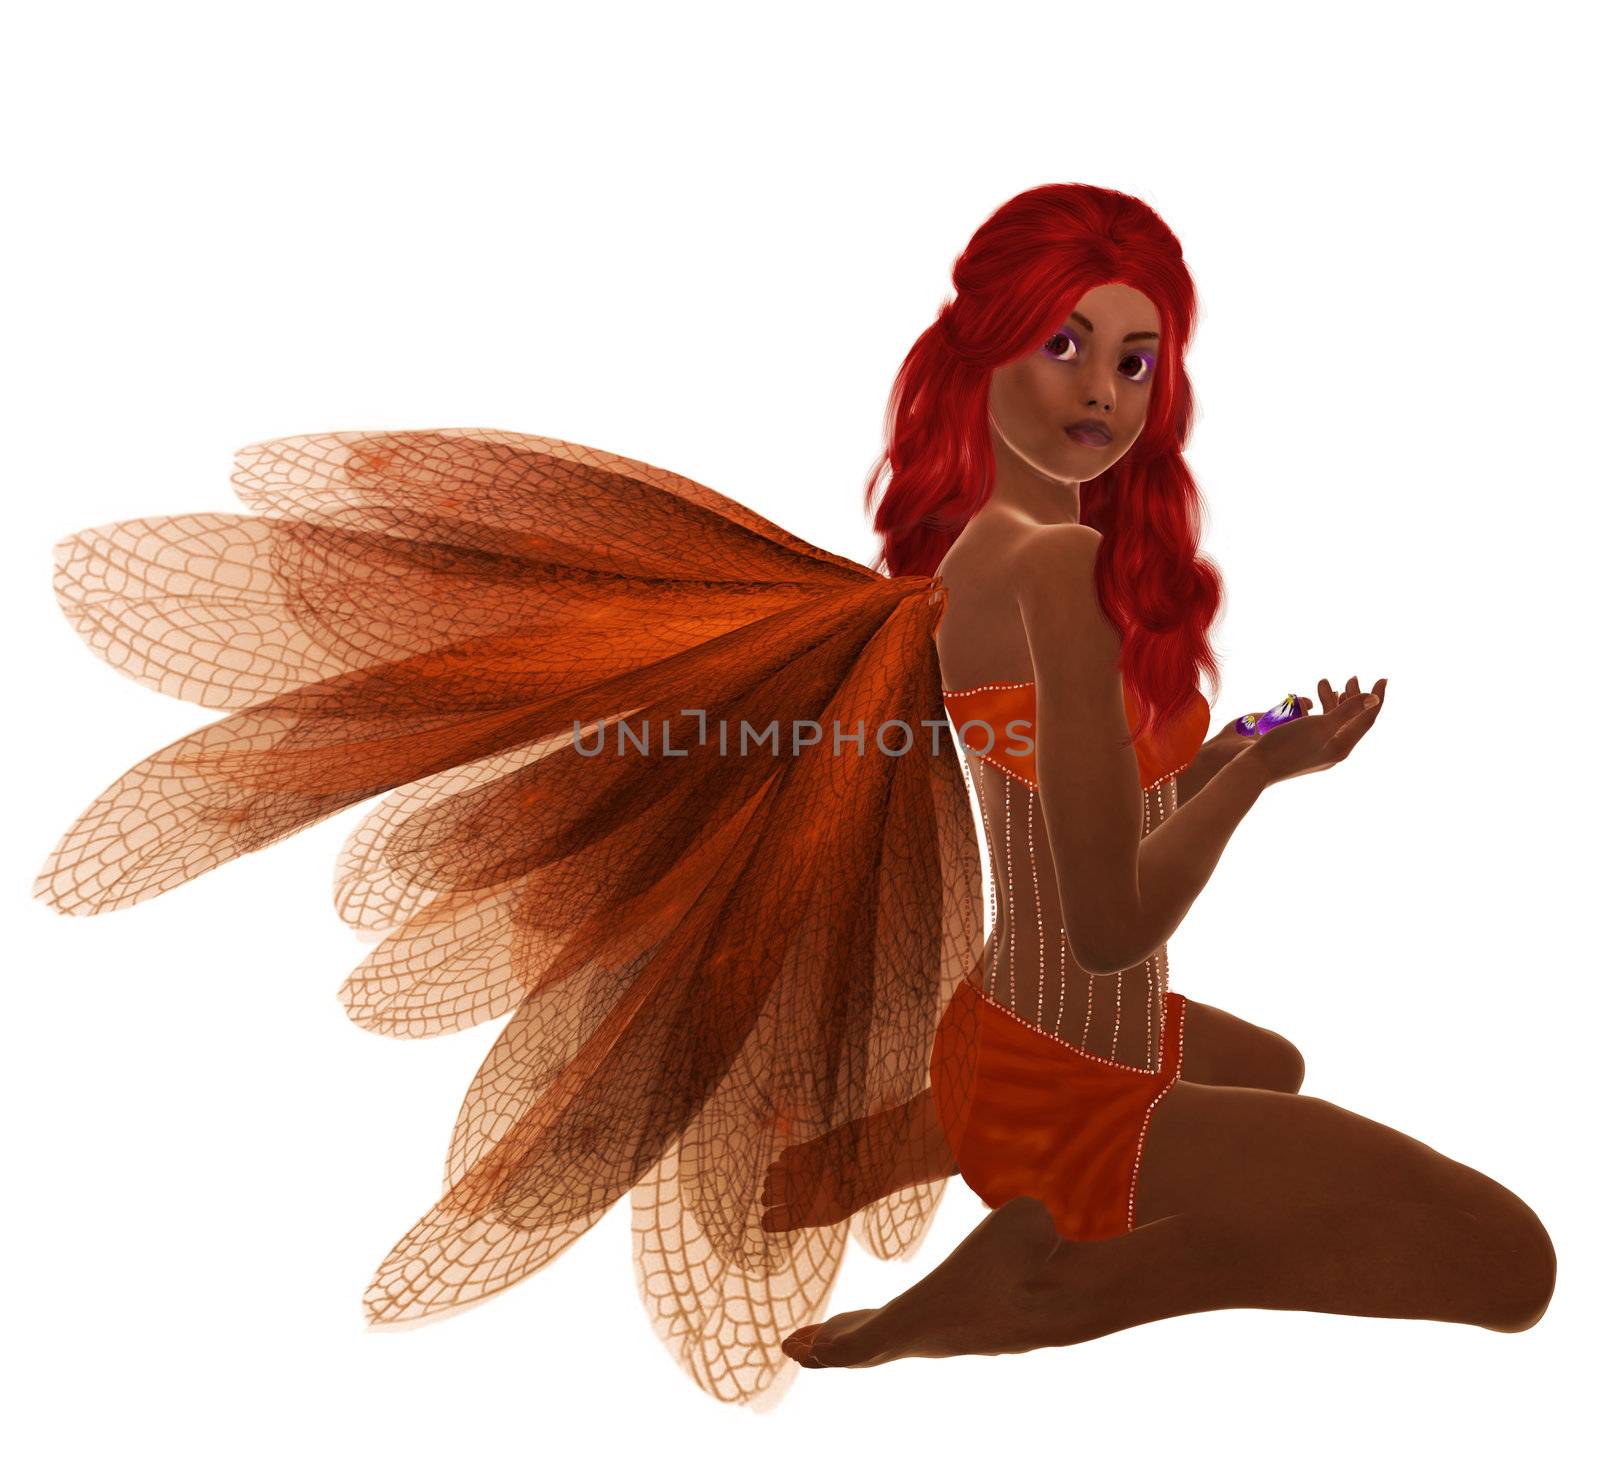 Orange fairy with red hair, sitting holding flowers in her hand